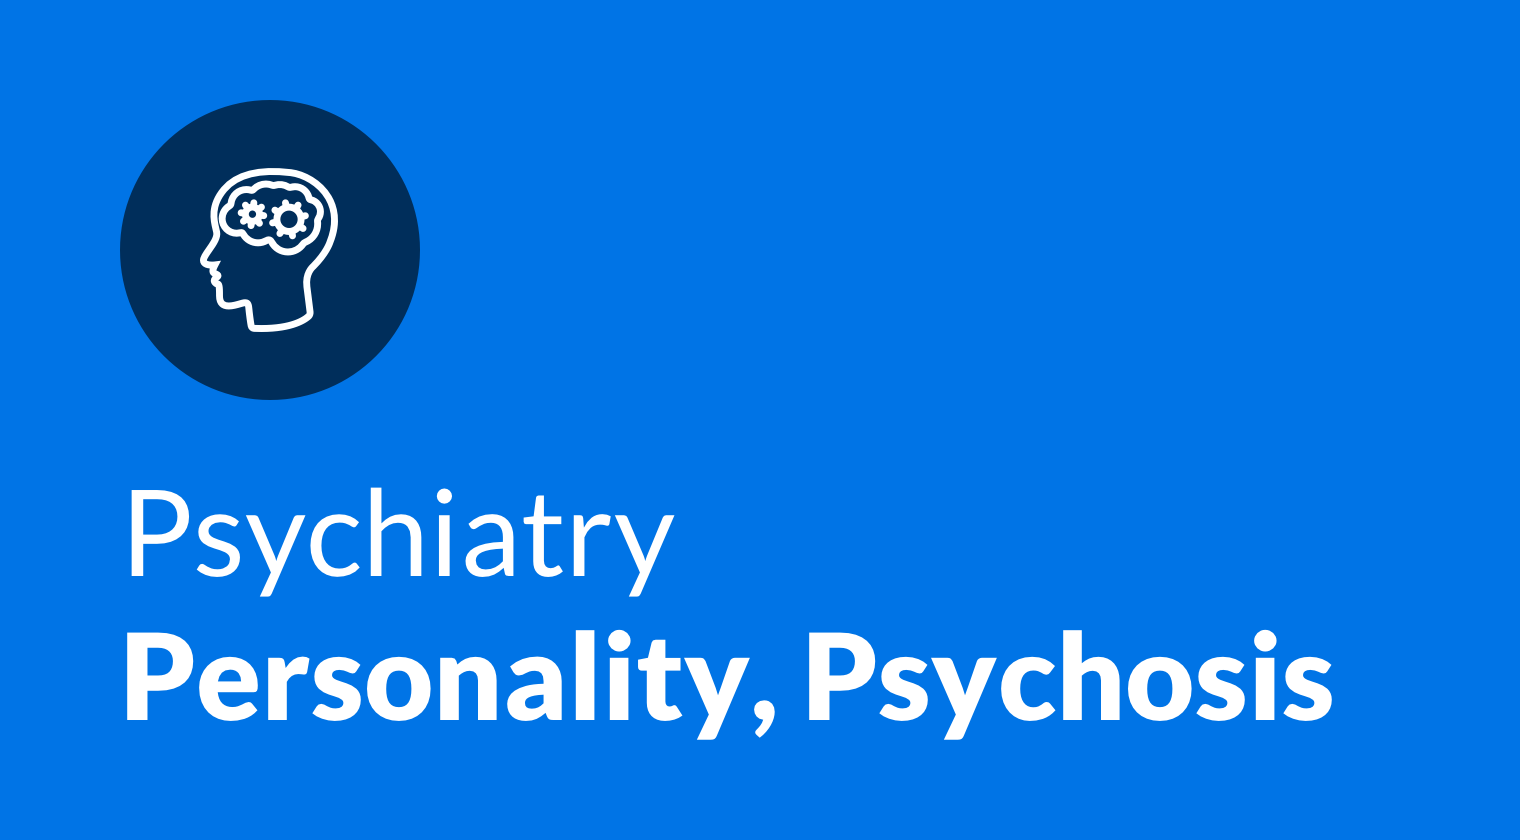 https://5092121.fs1.hubspotusercontent-na1.net/hubfs/5092121/Course_Image_Psychiatry_Personality@2x.png